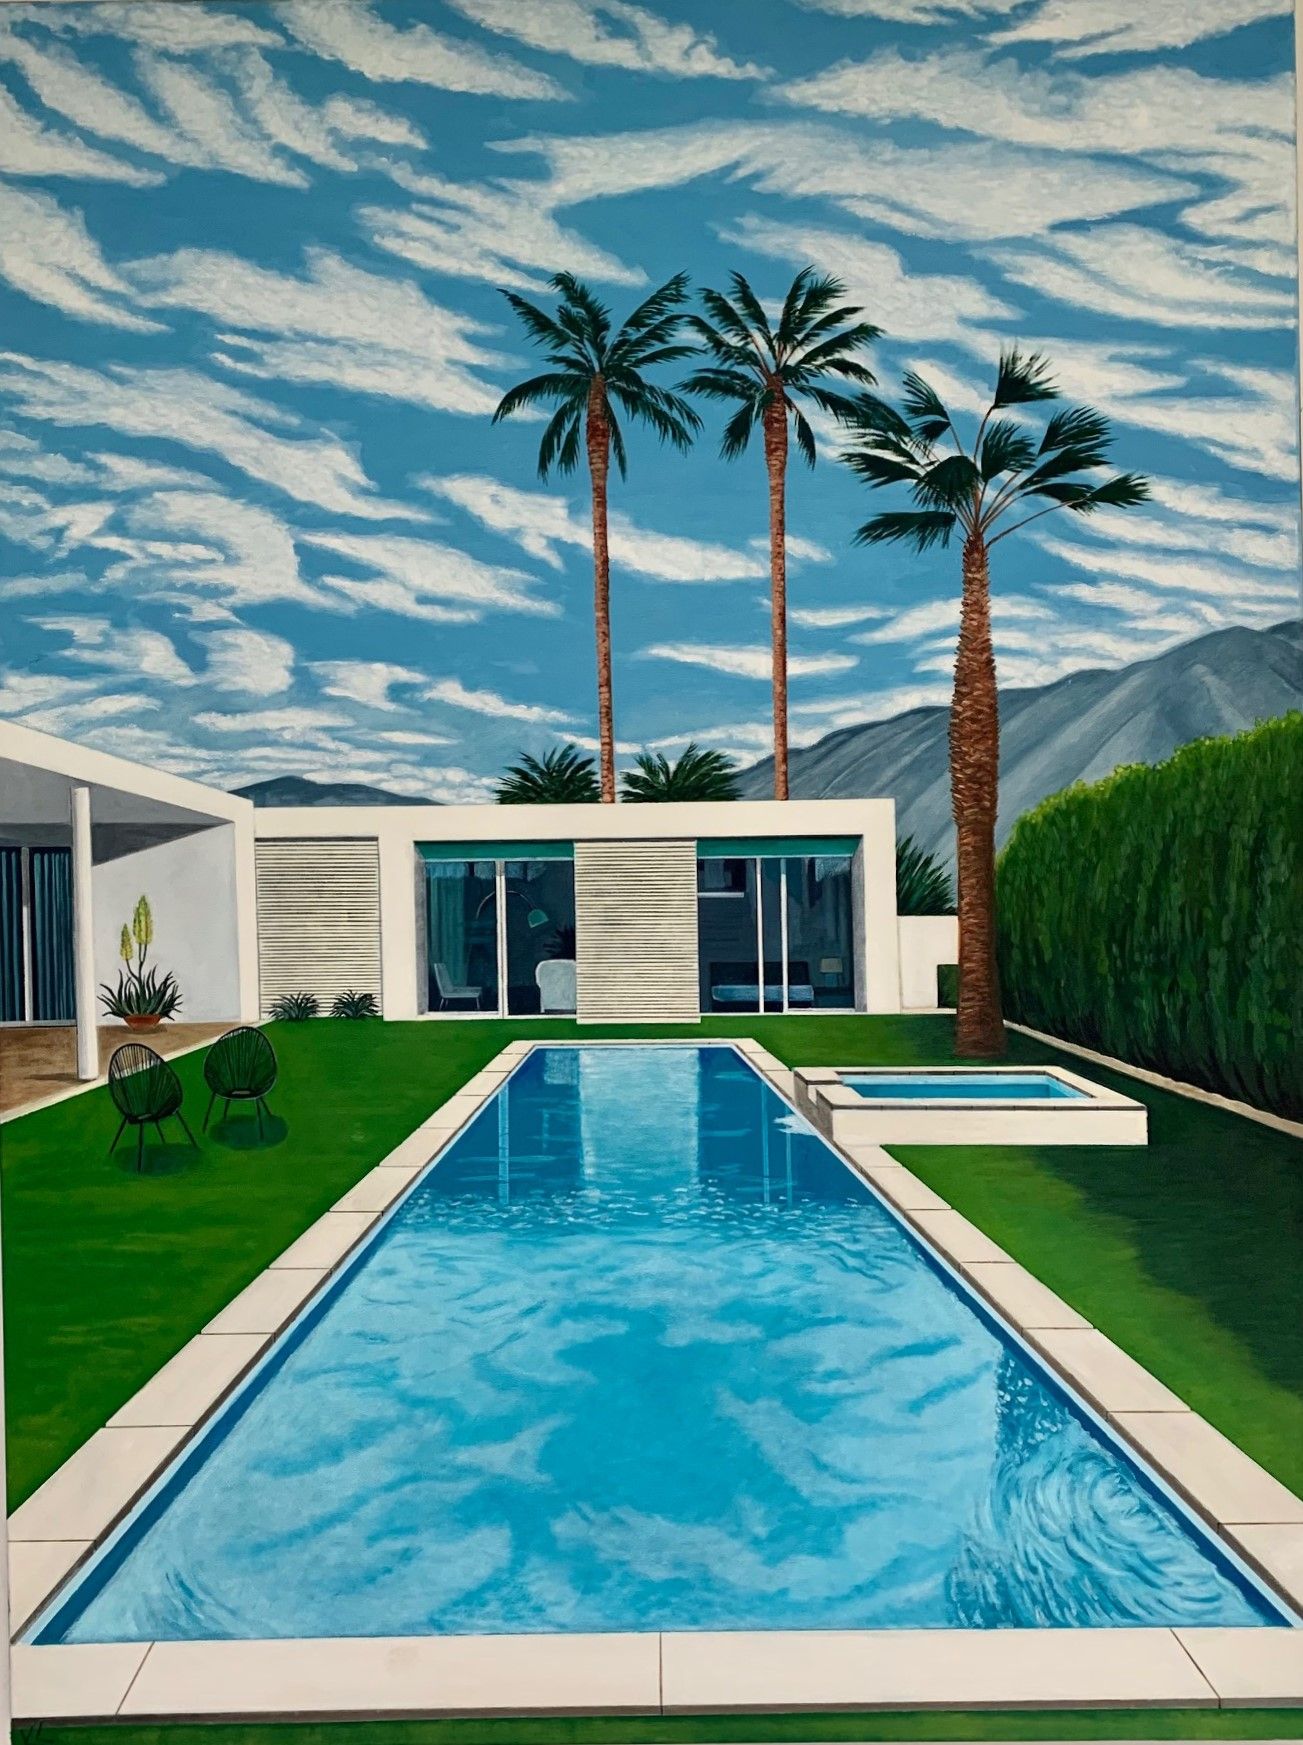 Cloudy Pool with Acapulco Chairs by Karen Lynn